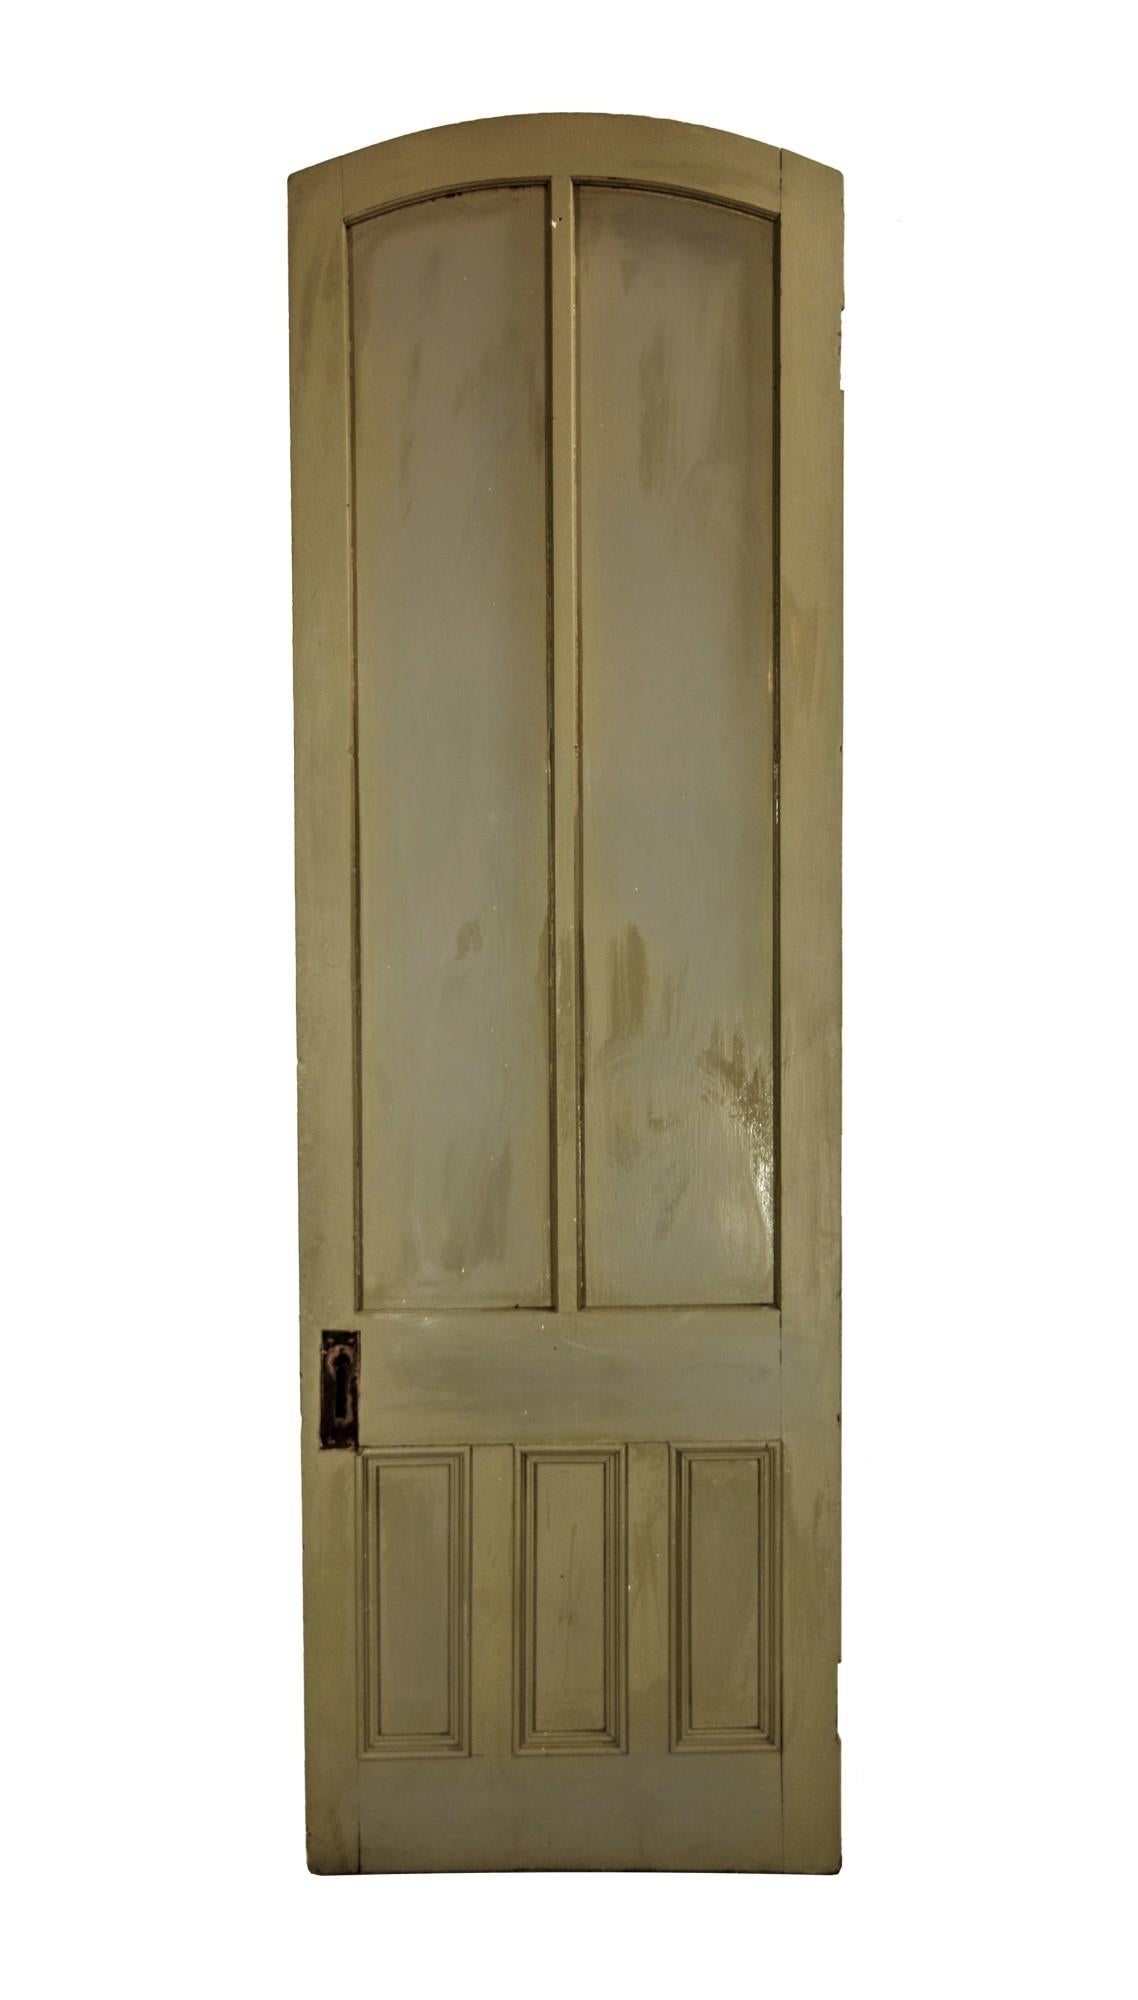 Late 19th century antique tall gray painted pine arched door with five vertical panels. The panels and trim are two tone on one side. This can be seen at our 400 Gilligan St location in Scranton, PA. Measures: Tall 100.5 x 31.5.